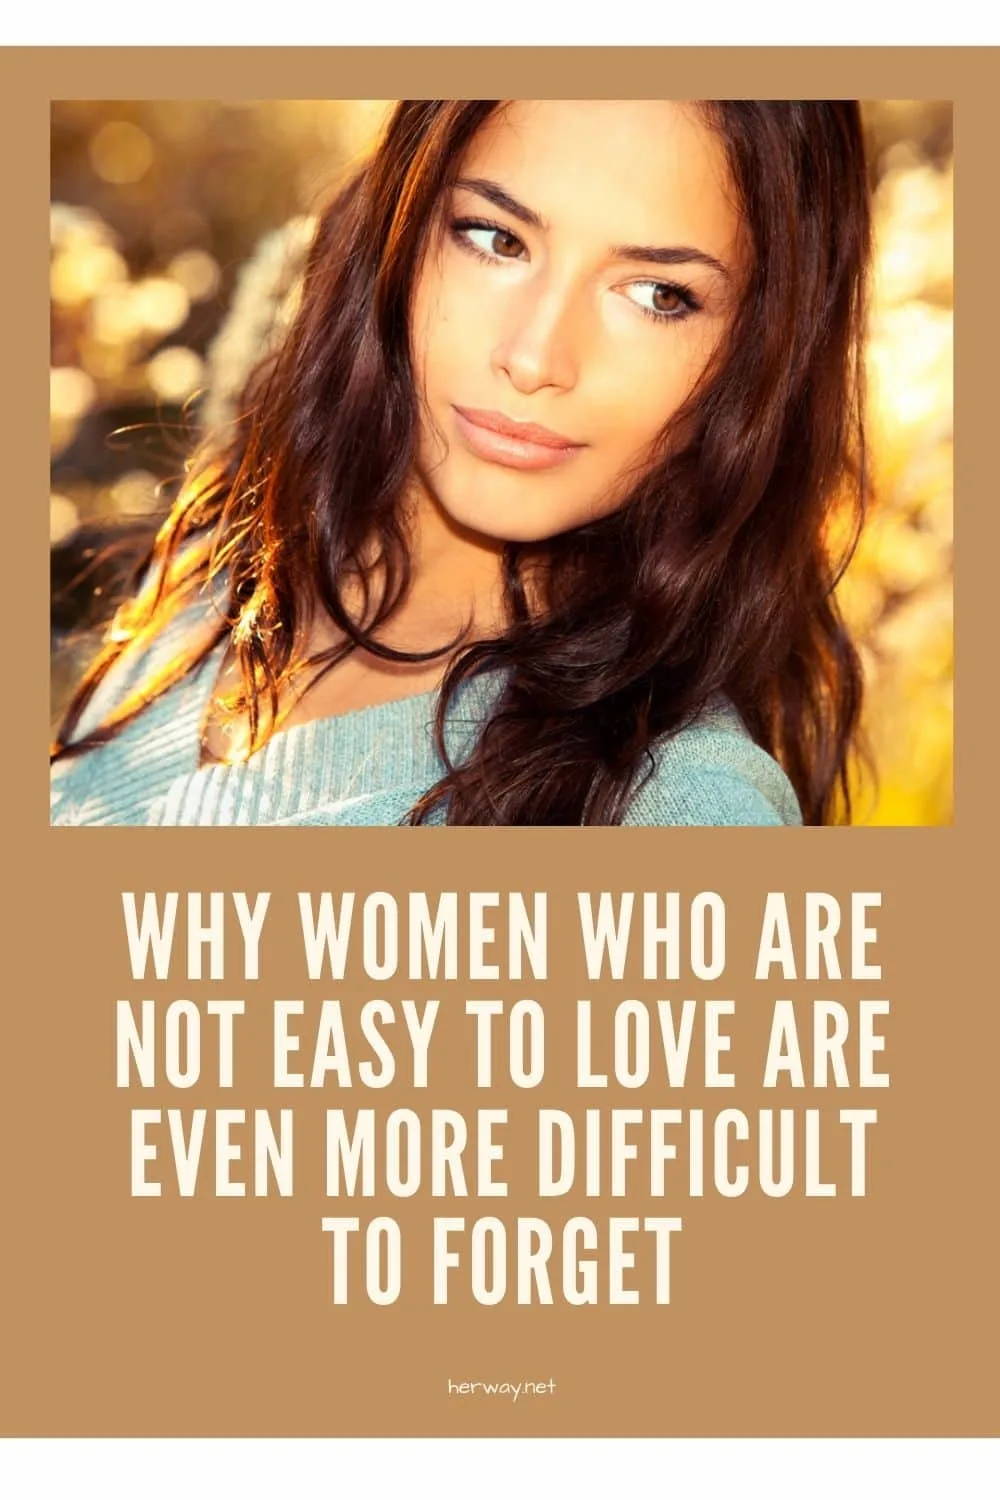 Why Women Who Are Not Easy To Love Are Even More Difficult To Forget